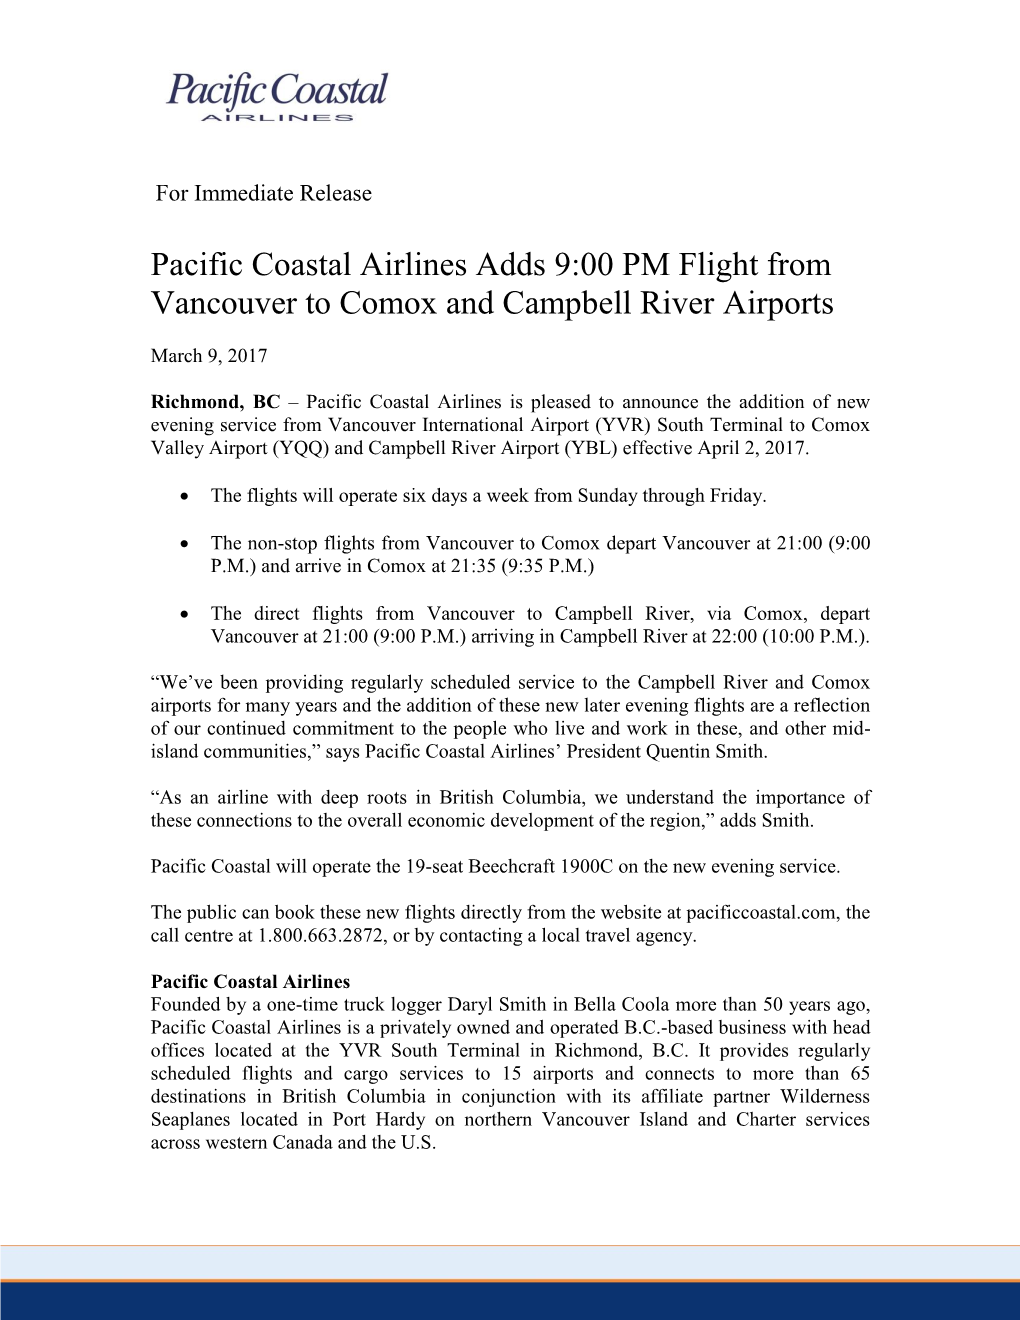 Pacific Coastal Airlines Adds 9:00 PM Flight from Vancouver to Comox and Campbell River Airports